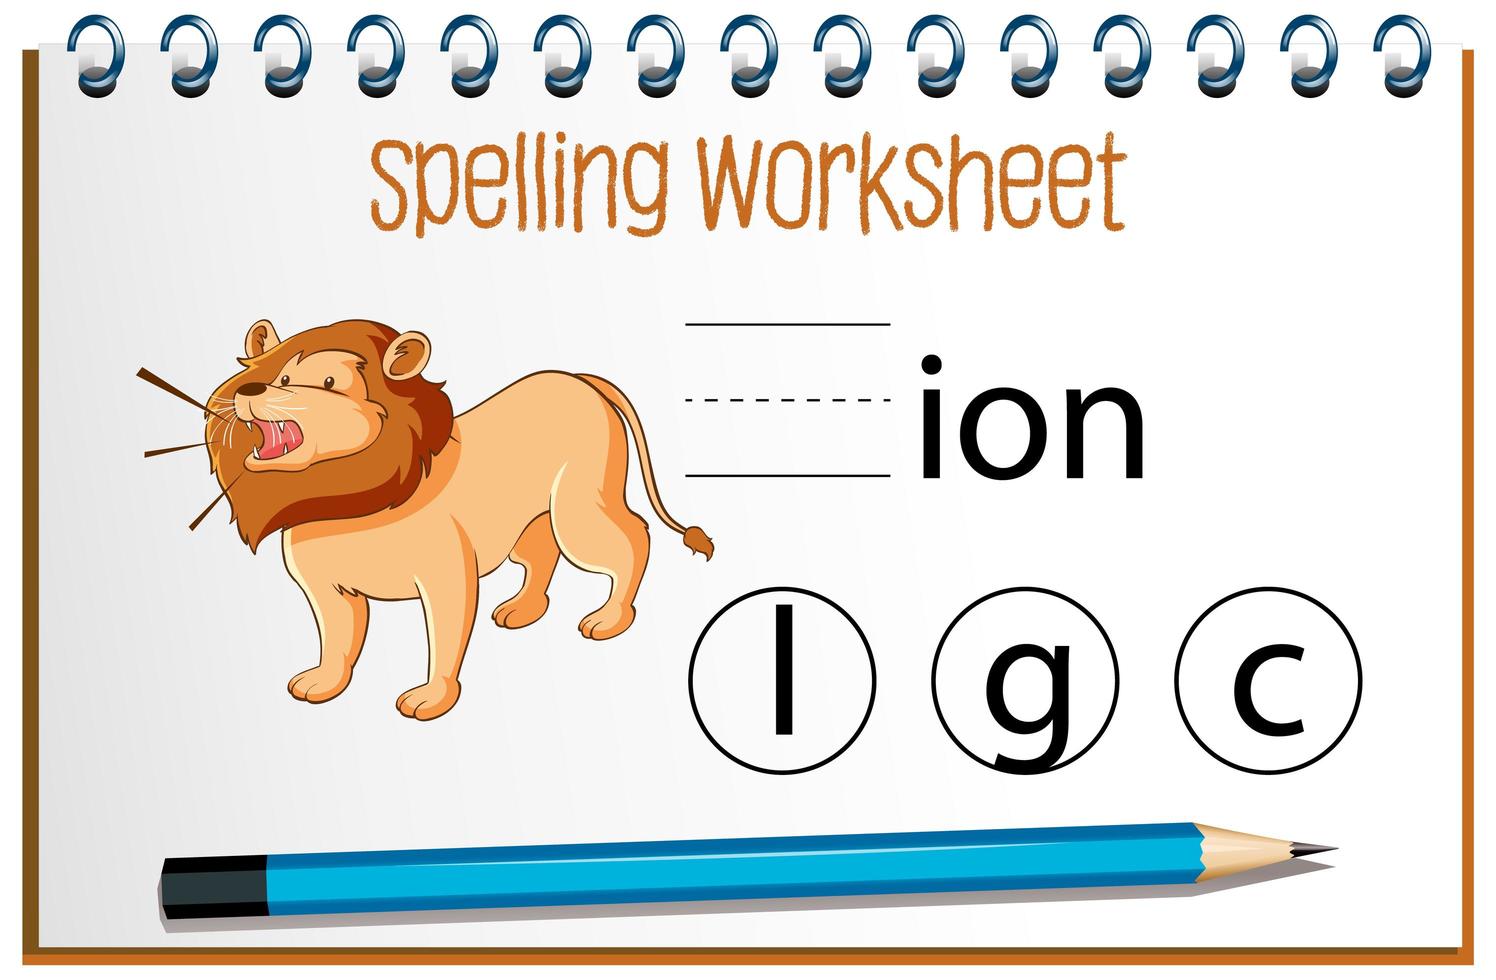 Find missing letter with lion vector